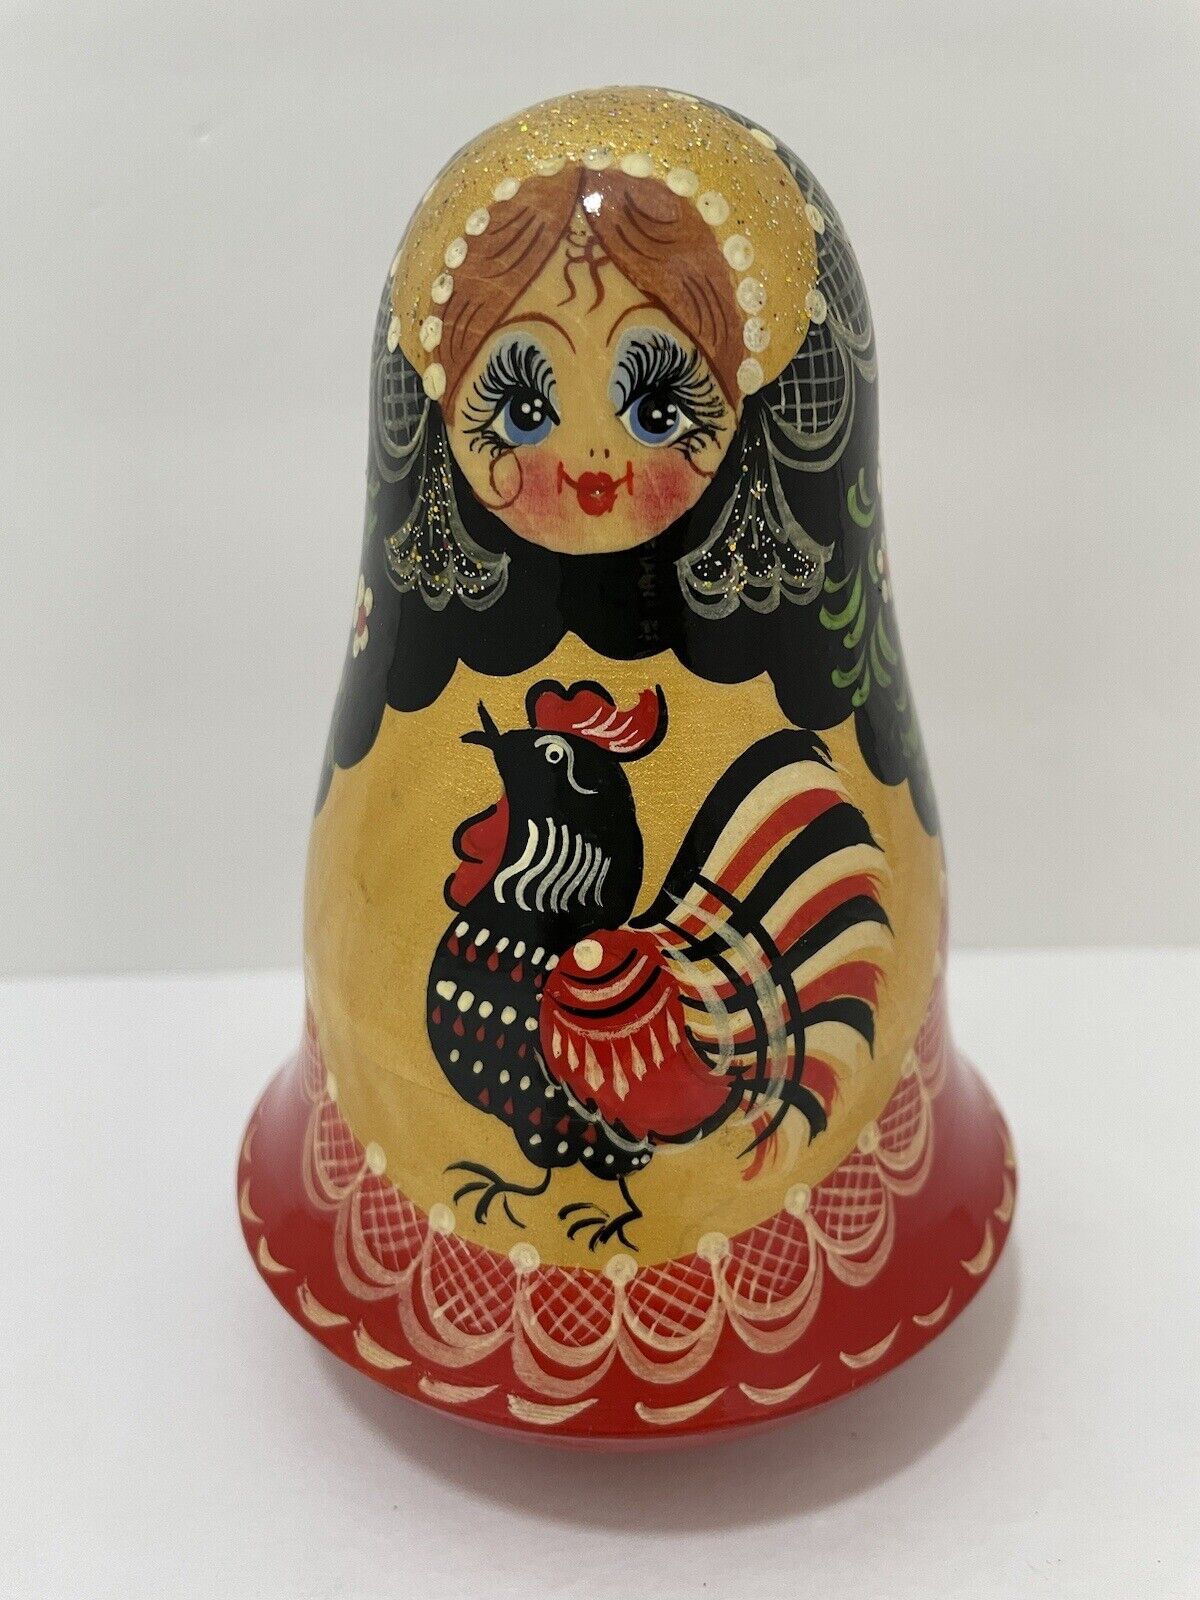 VTG Musical Russian Doll Wooden Hand Painted Roly Poly 5” Doll